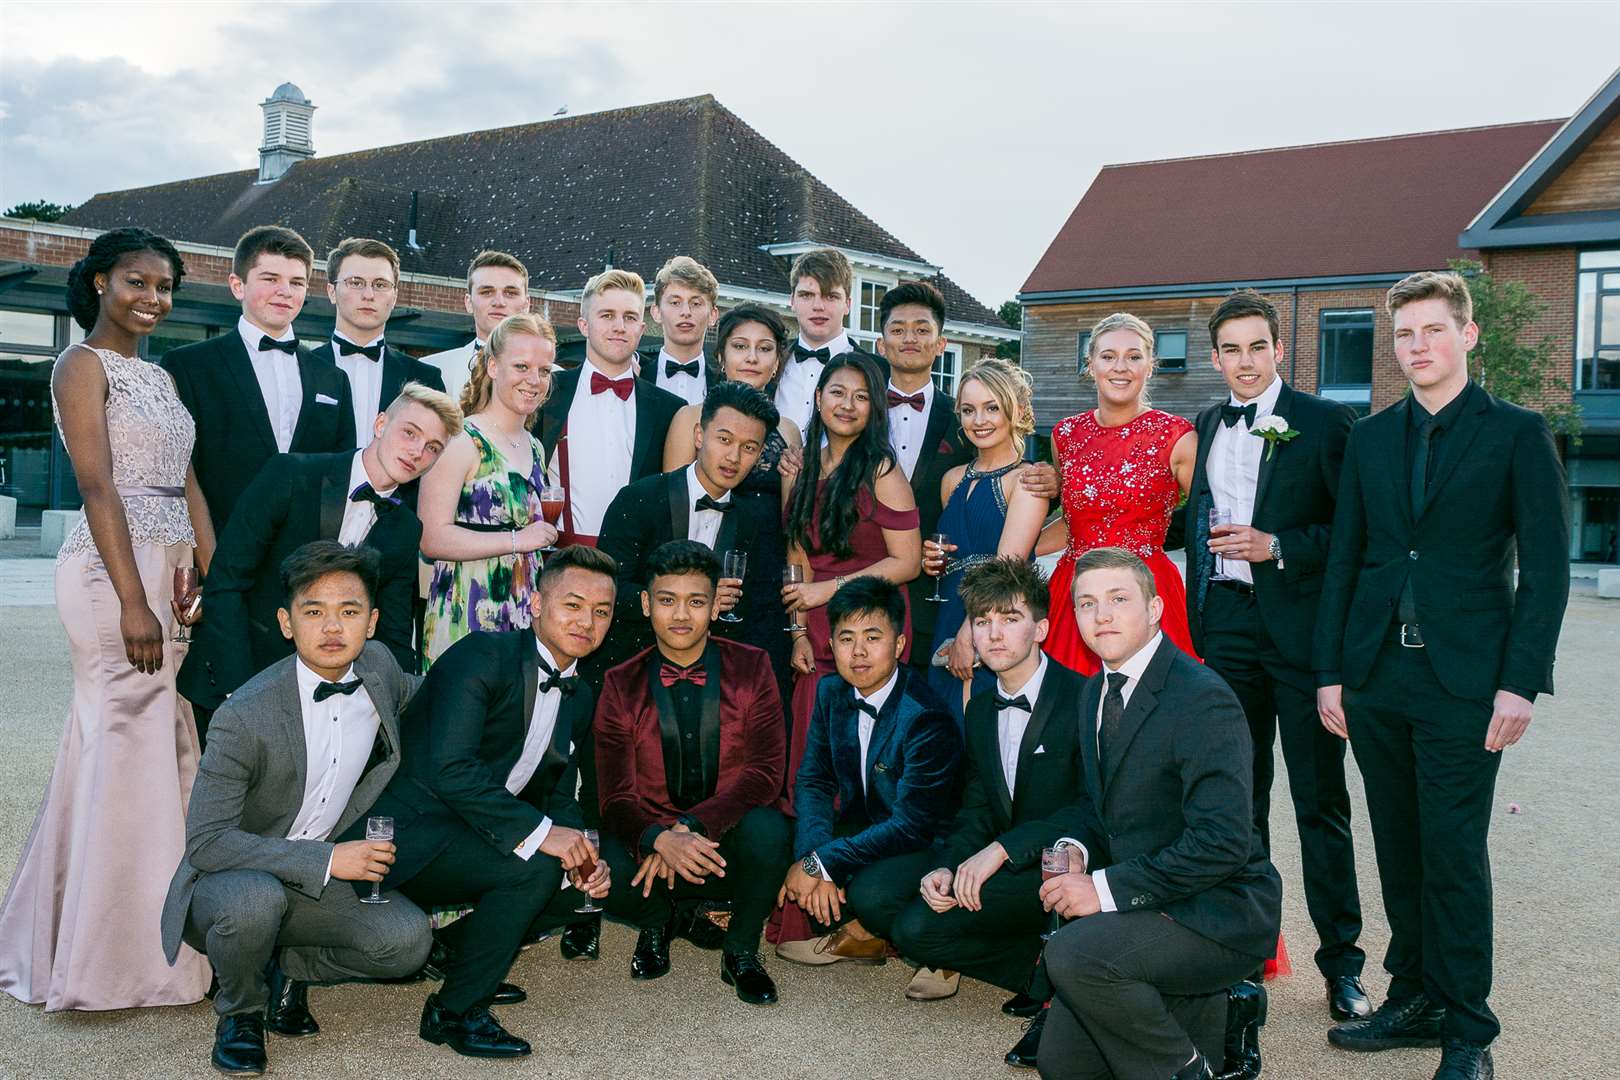 Duke of York's Royal Military School students were all over the world when it came to getting A Level results, but they celebrated in style at their summer prom